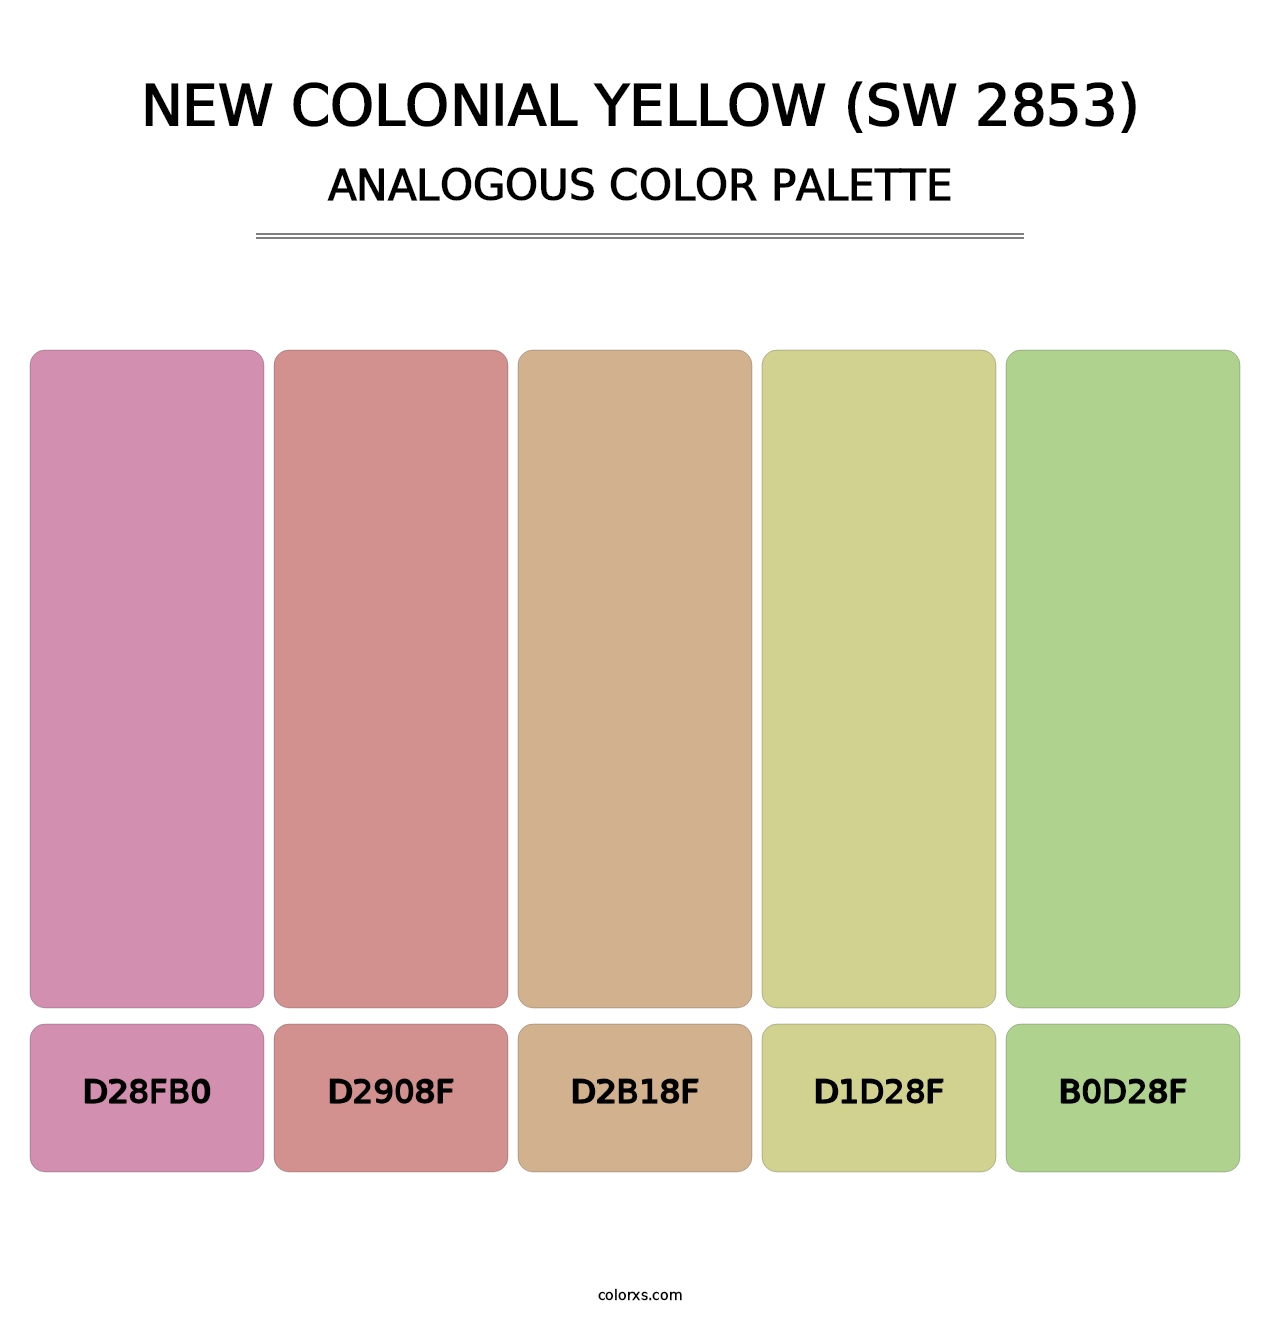 New Colonial Yellow (SW 2853) - Analogous Color Palette